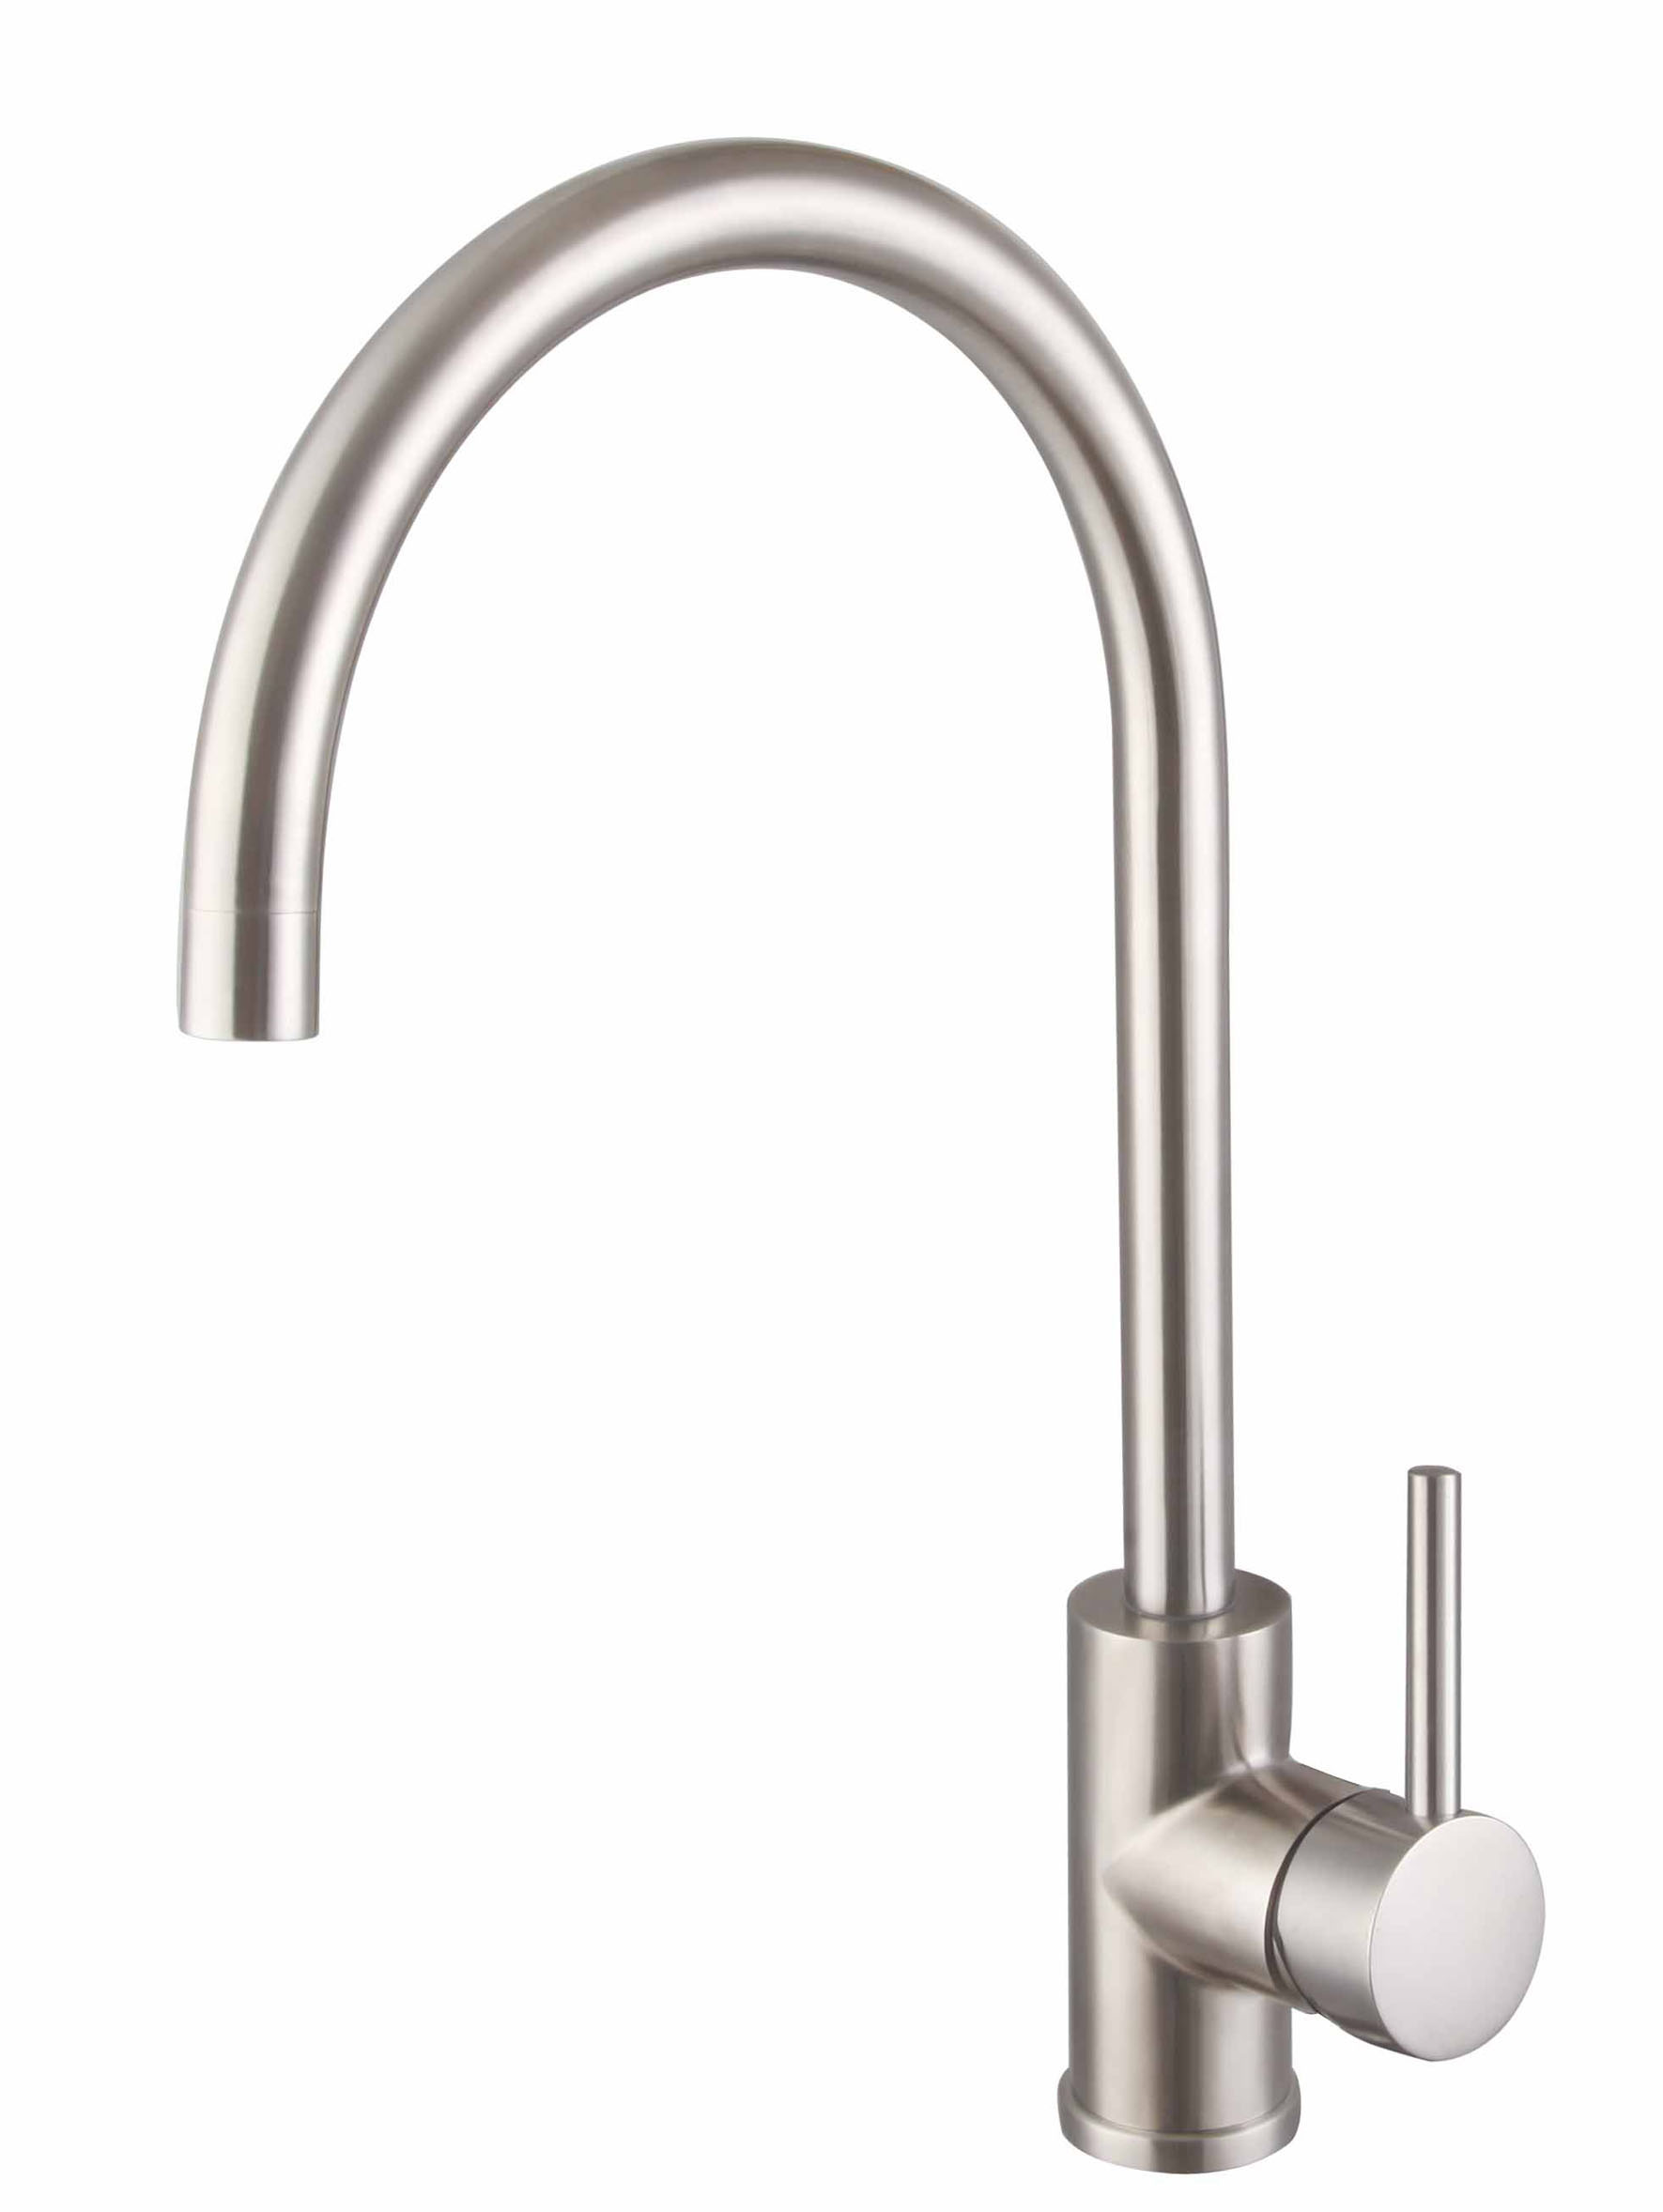 Suggestion for Purchasing Pull-out Kitchen faucet